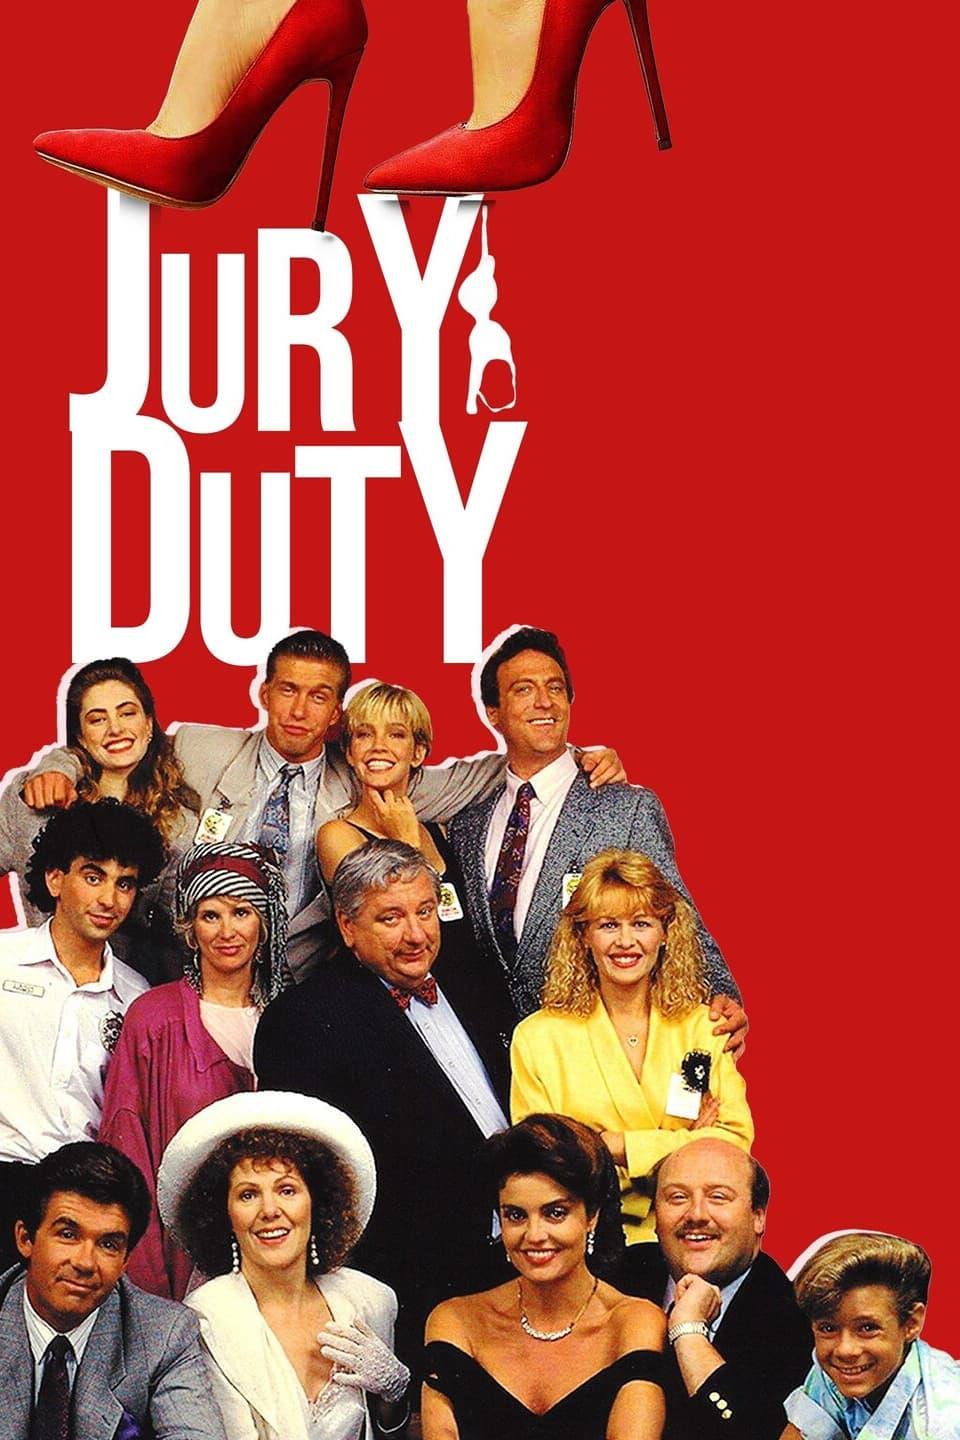 Jury Duty: The Comedy poster